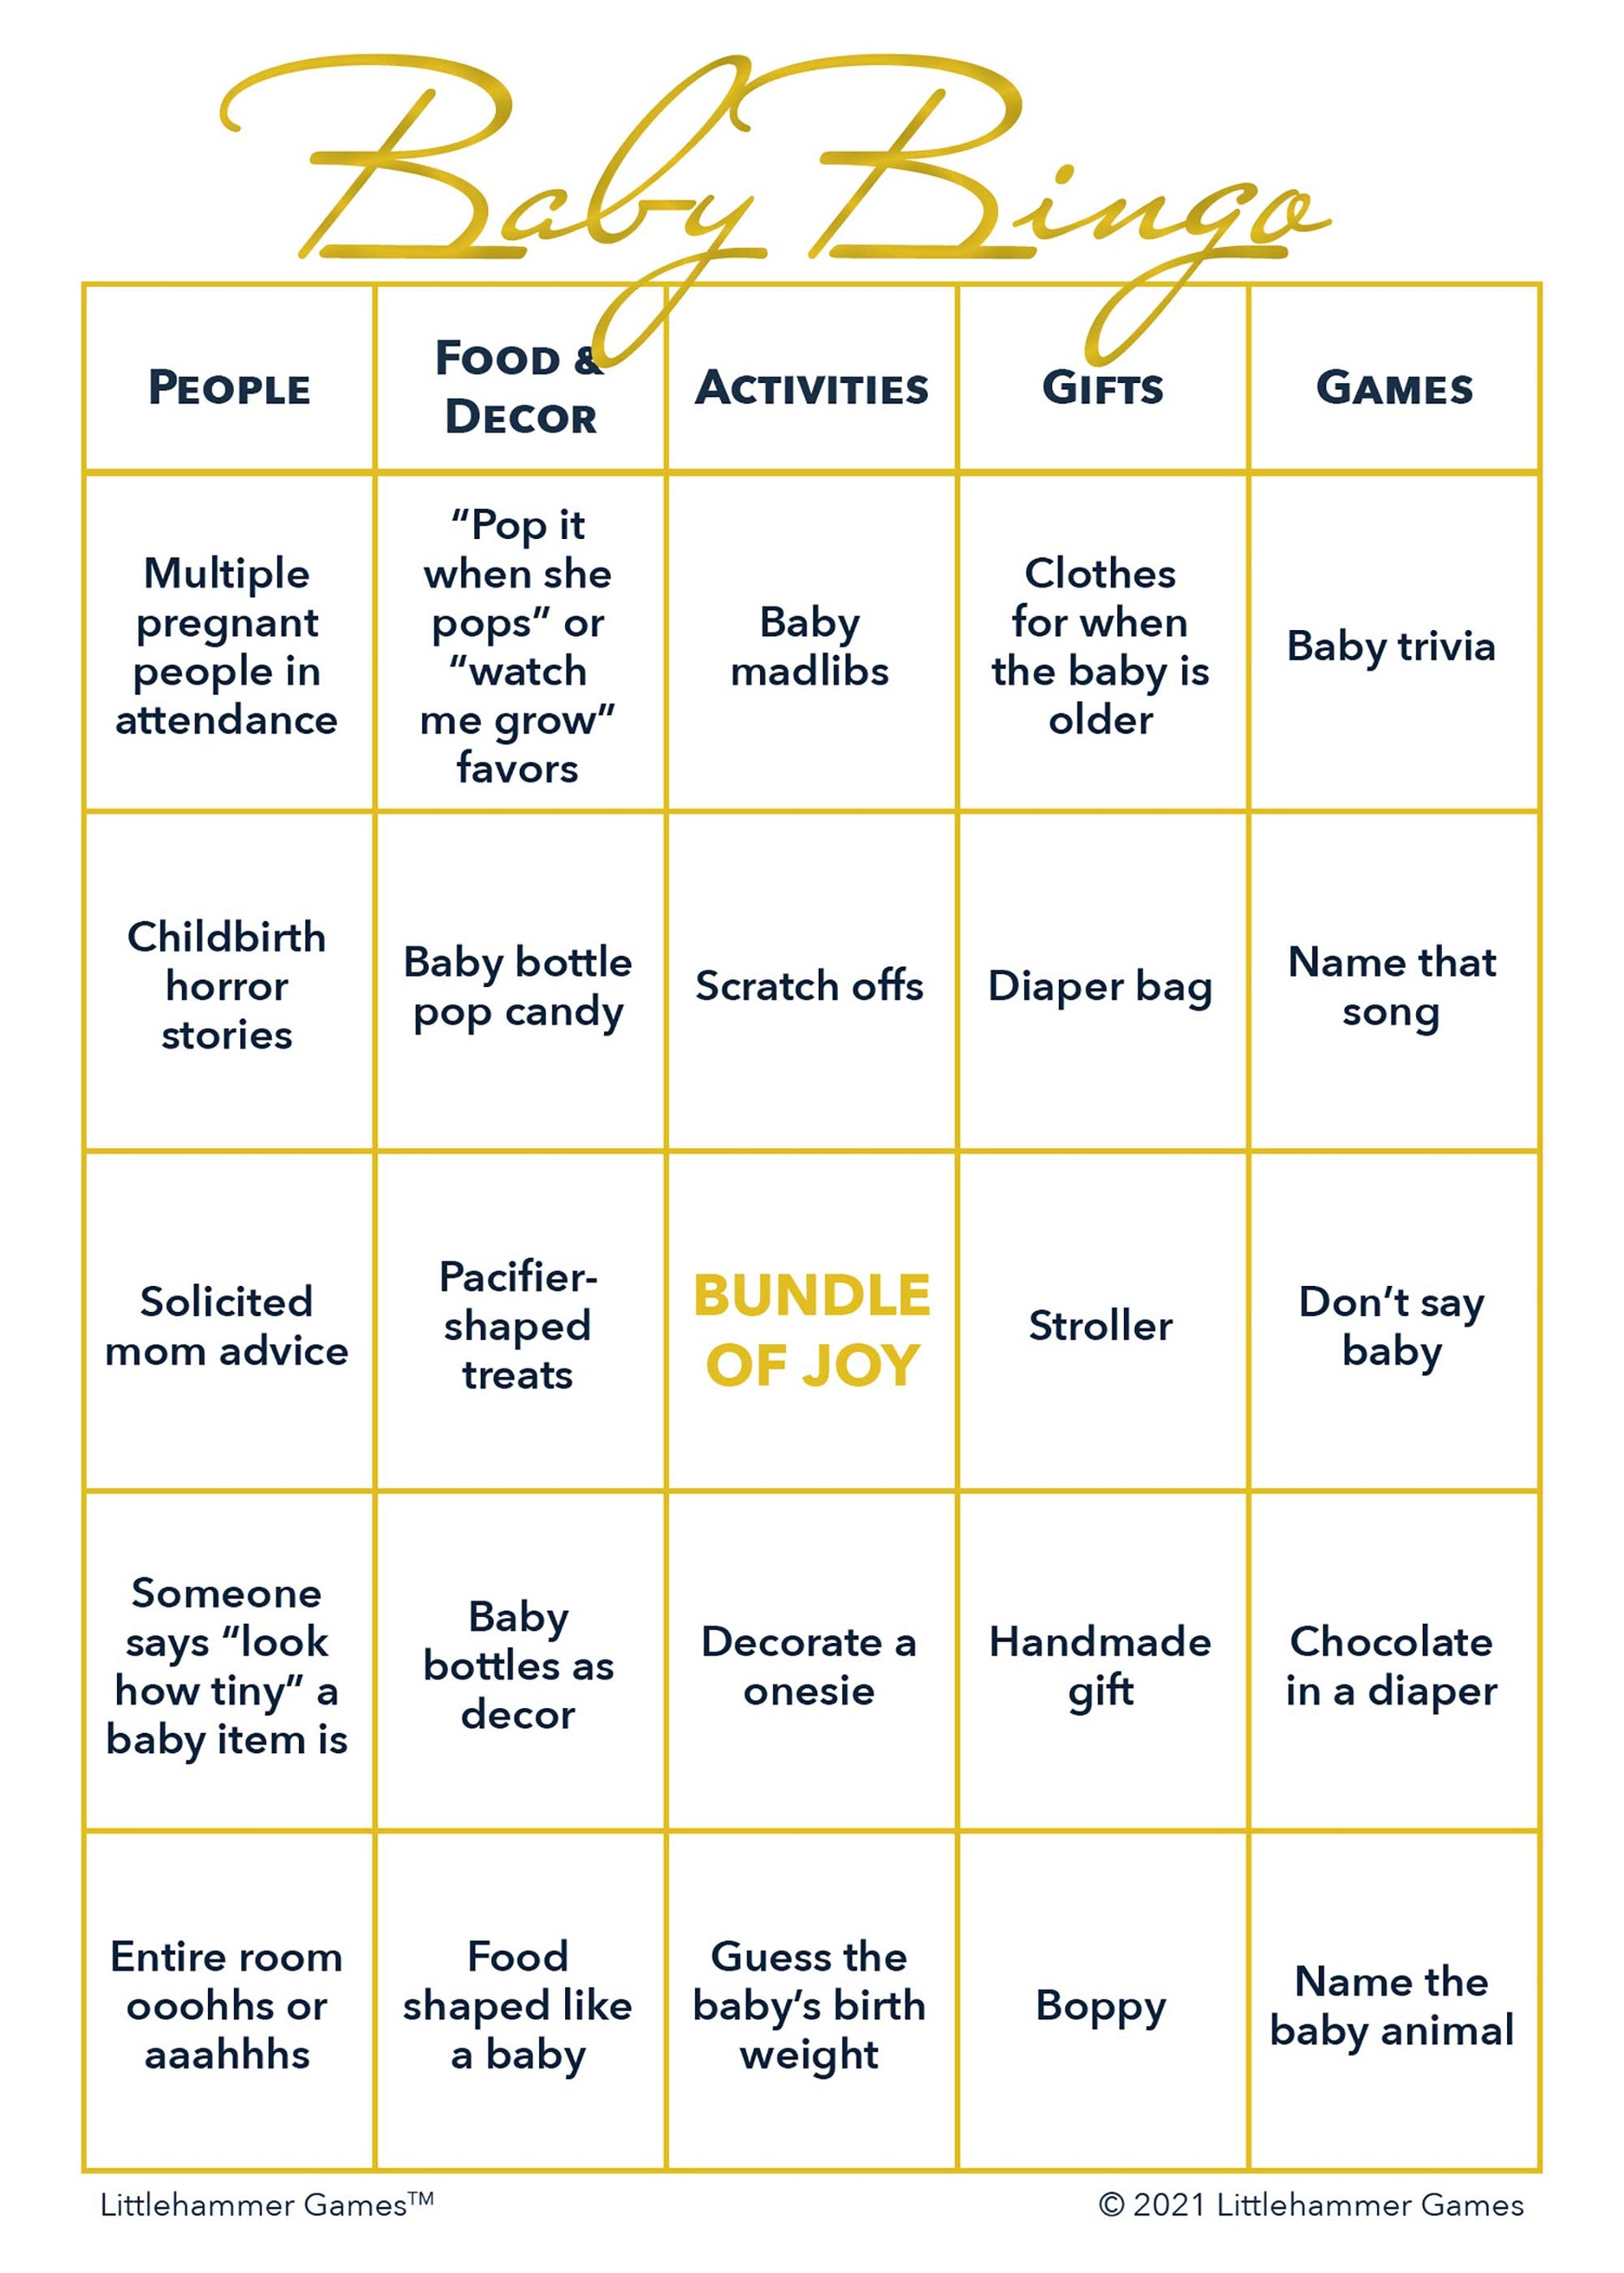 Baby Bingo game card with gold text on a white background